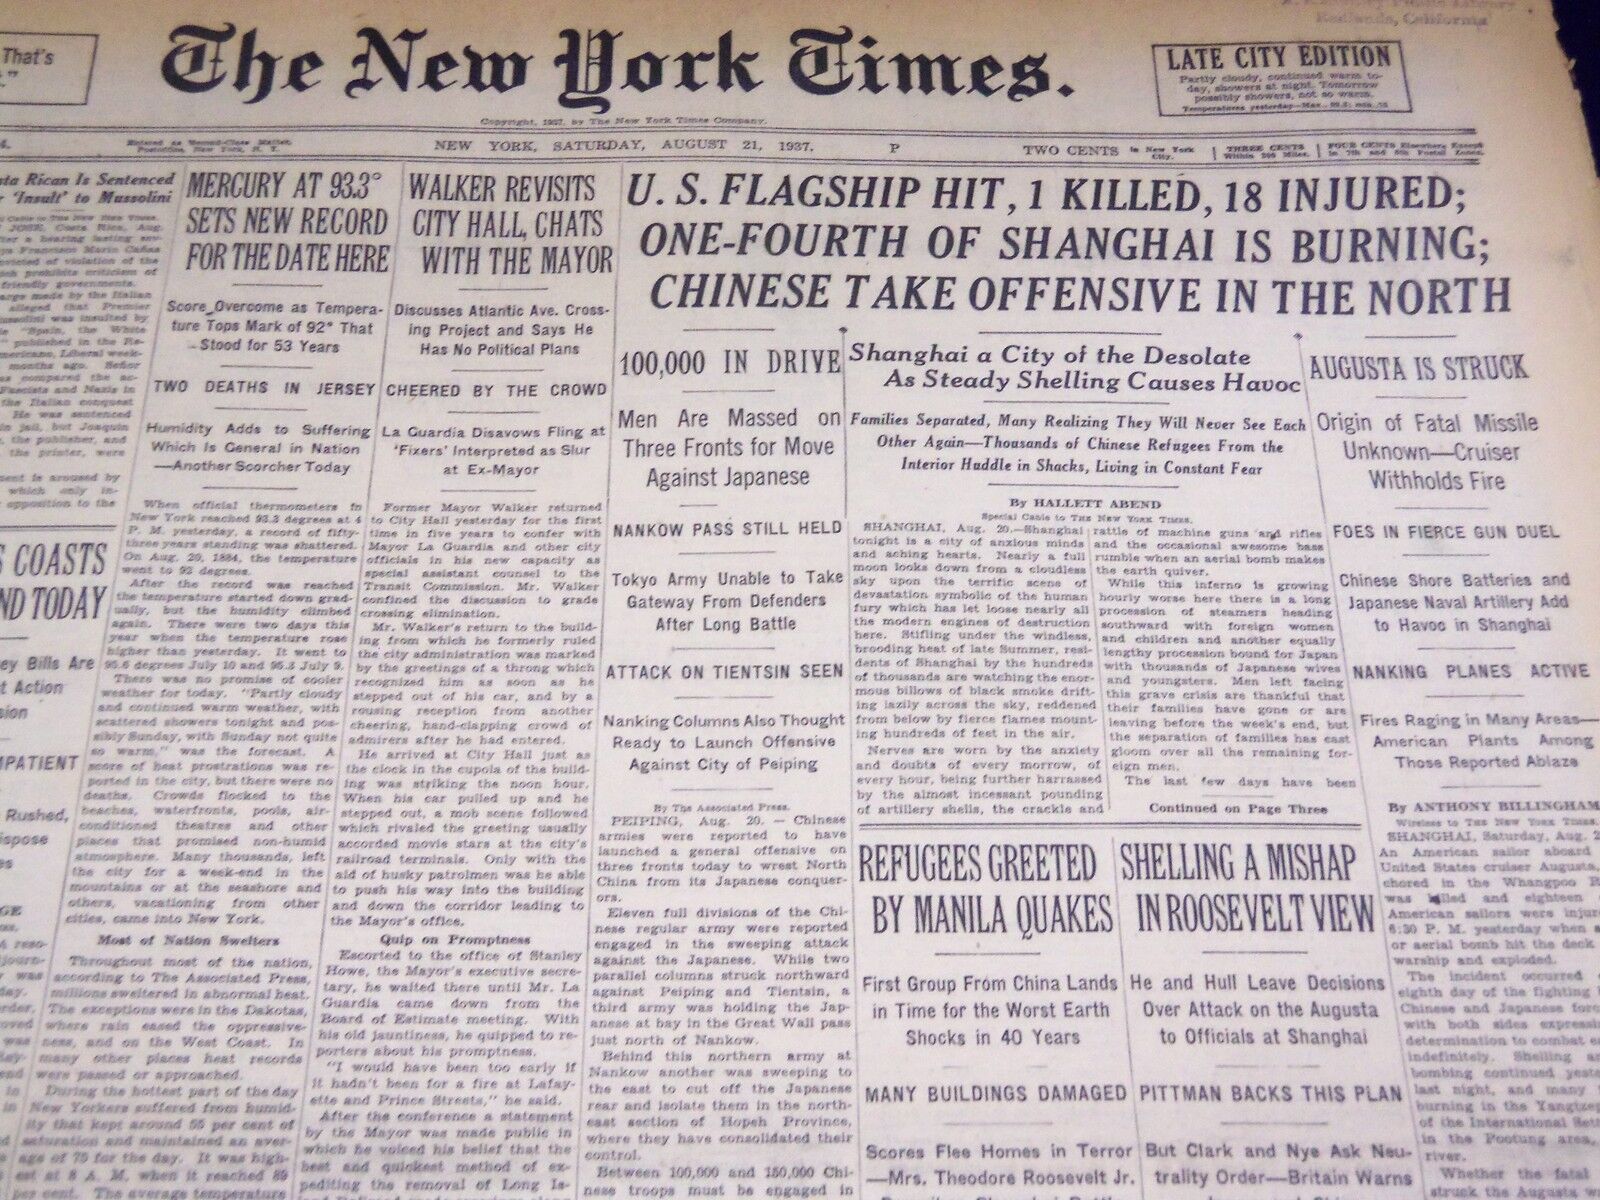 1937 AUGUST 21 NEW YORK TIMES - ONE FOURTH OF SHANGHAI BURNING - NT 3029